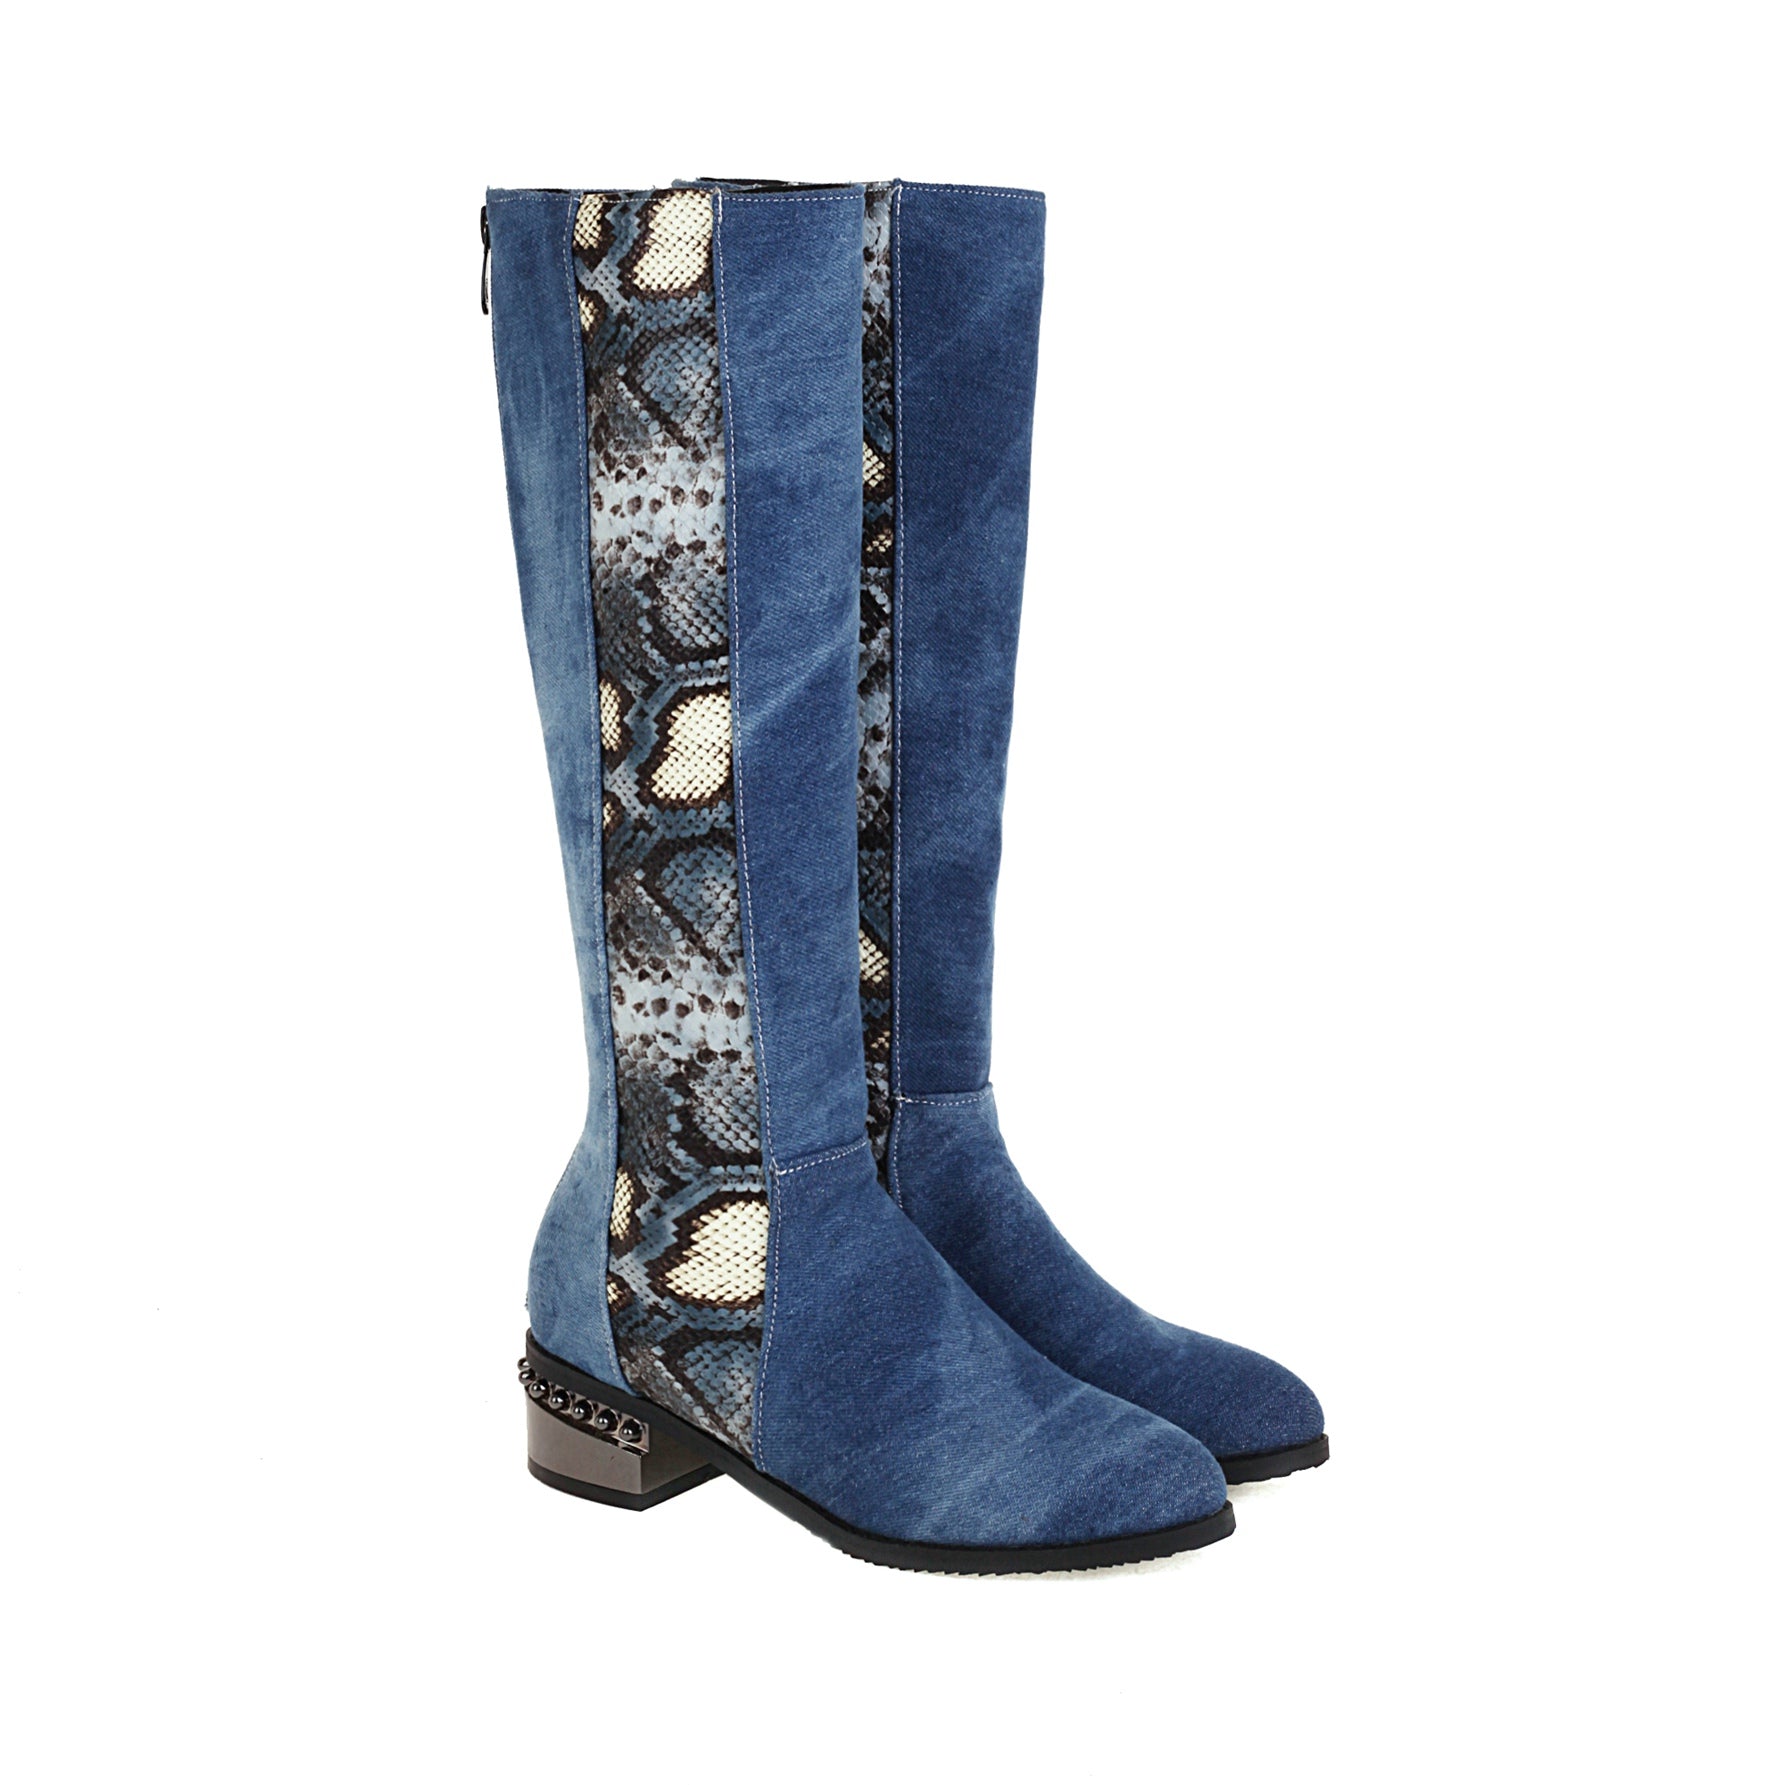 Bigsizeheels Concise Over the Knee Boots for women - Denim Blue freeshipping - bigsizeheel®-size5-size15 -All Plus Sizes Available!